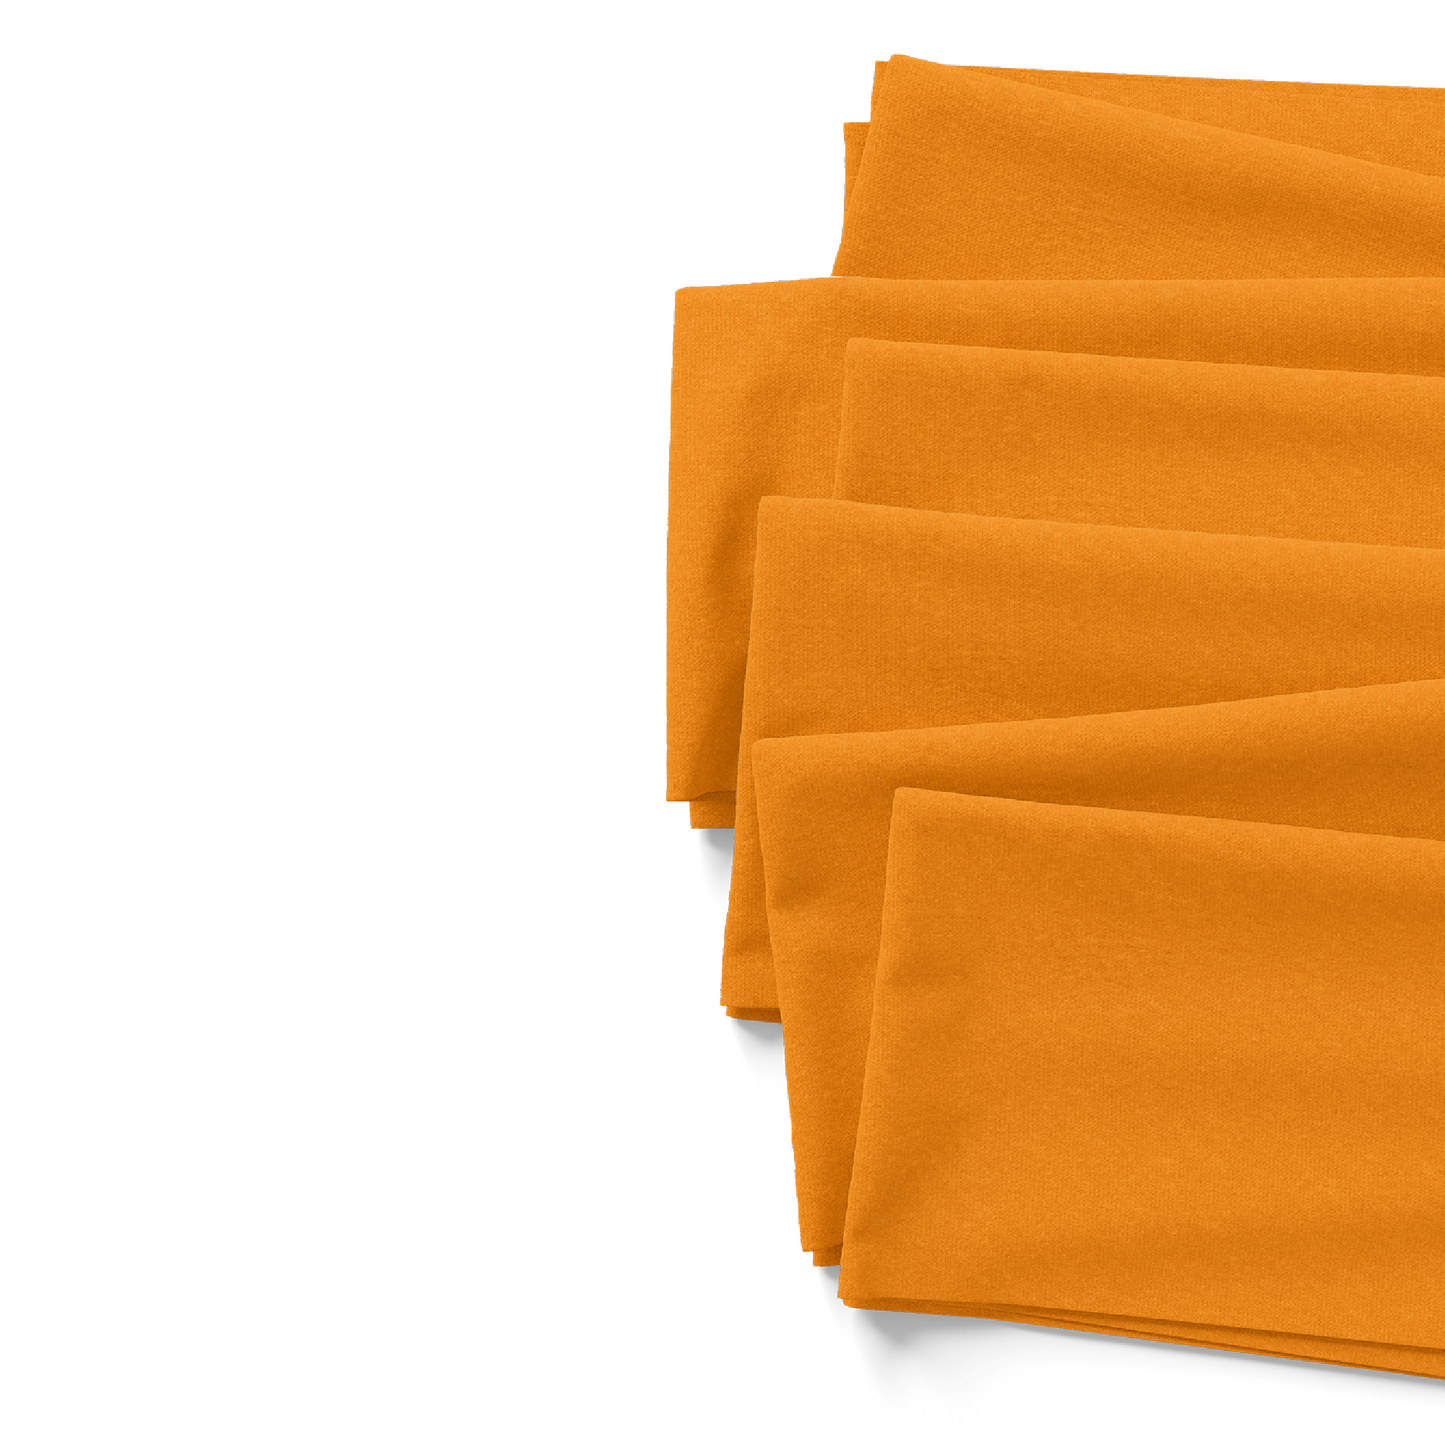 Liverpool, Ribbed, DBP, Polyester, and Neoprene solid Spring and Fall fabric by the yard in pumpkin Orange.